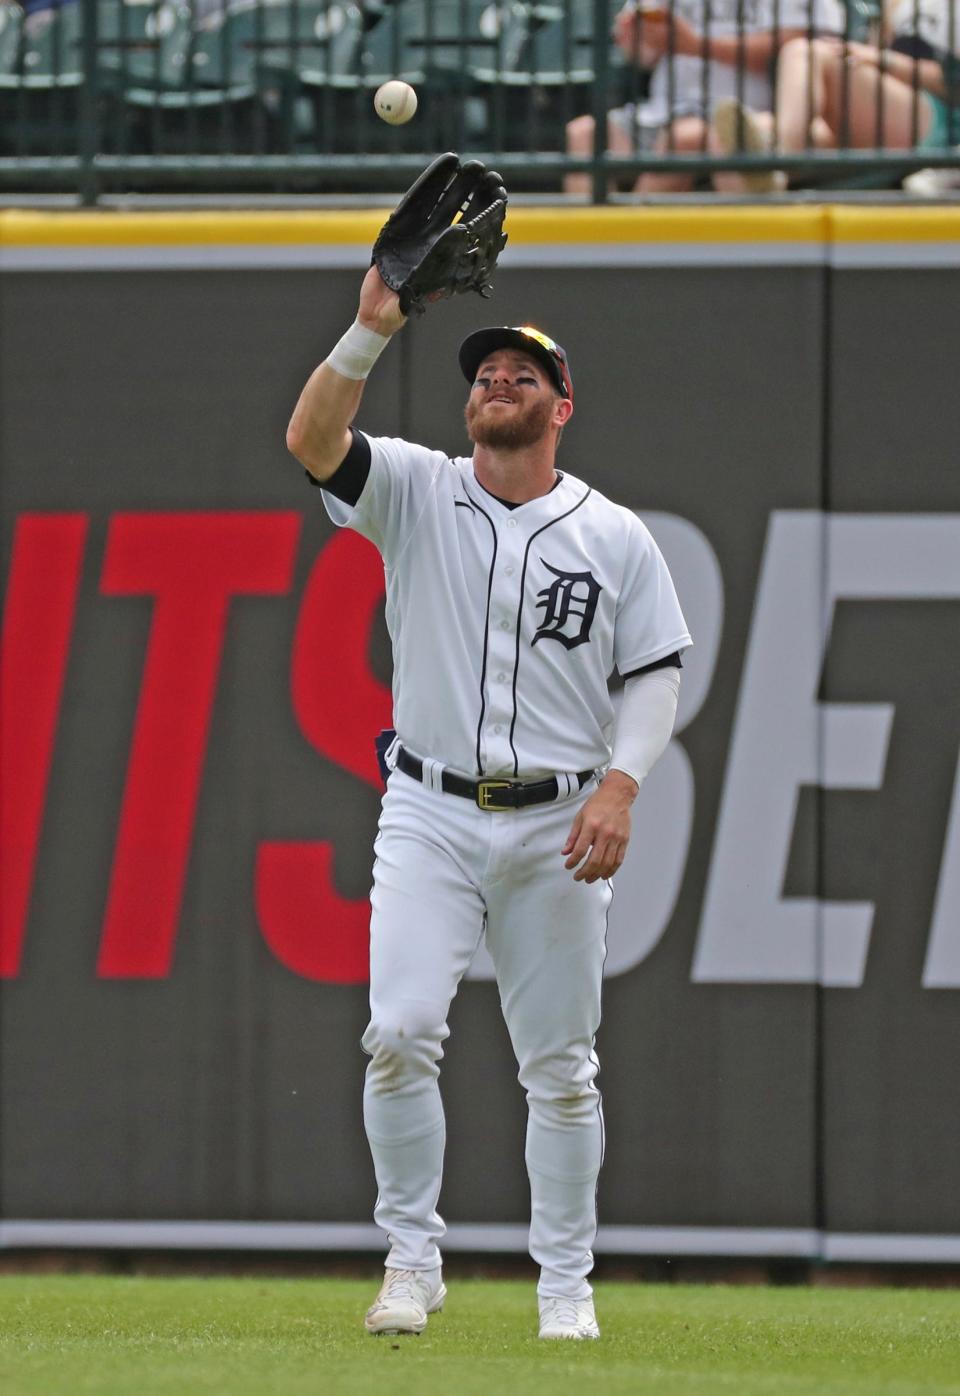 Detroit Tigers right fielder Robbie Grossman (8) catches a fly ball hit by Colorado Rockies shortstop Alan Trejo (13) during second-inning action on Sunday, April 24, 2022, at Comerica Park in Detroit.